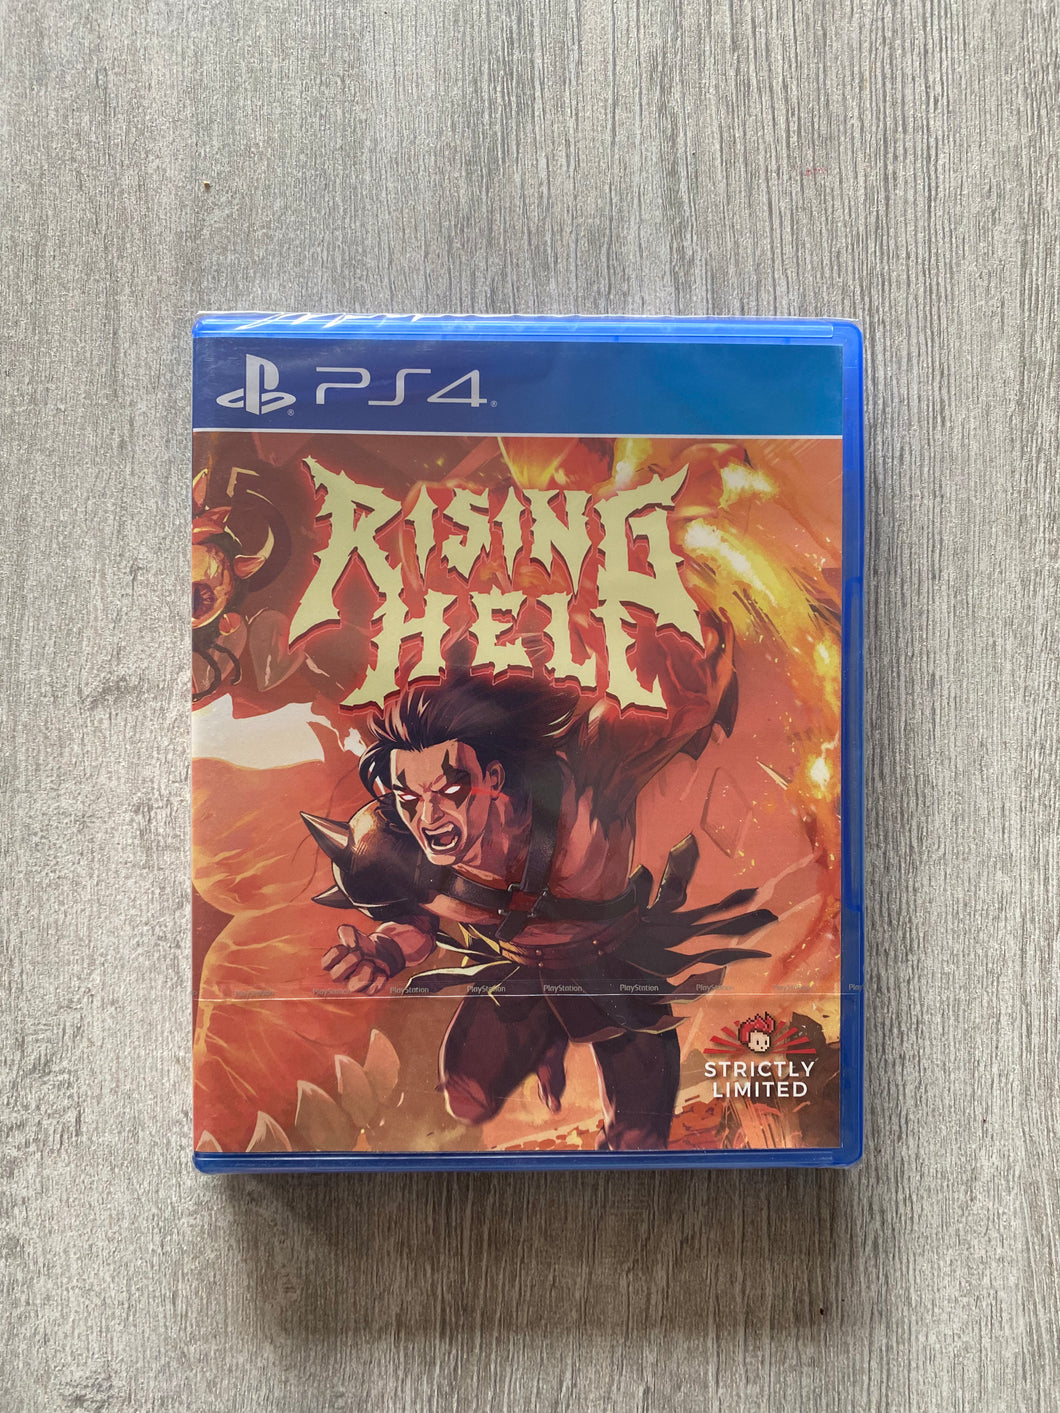 Rising hell / Strictly limited games / PS4 / 1200 copies